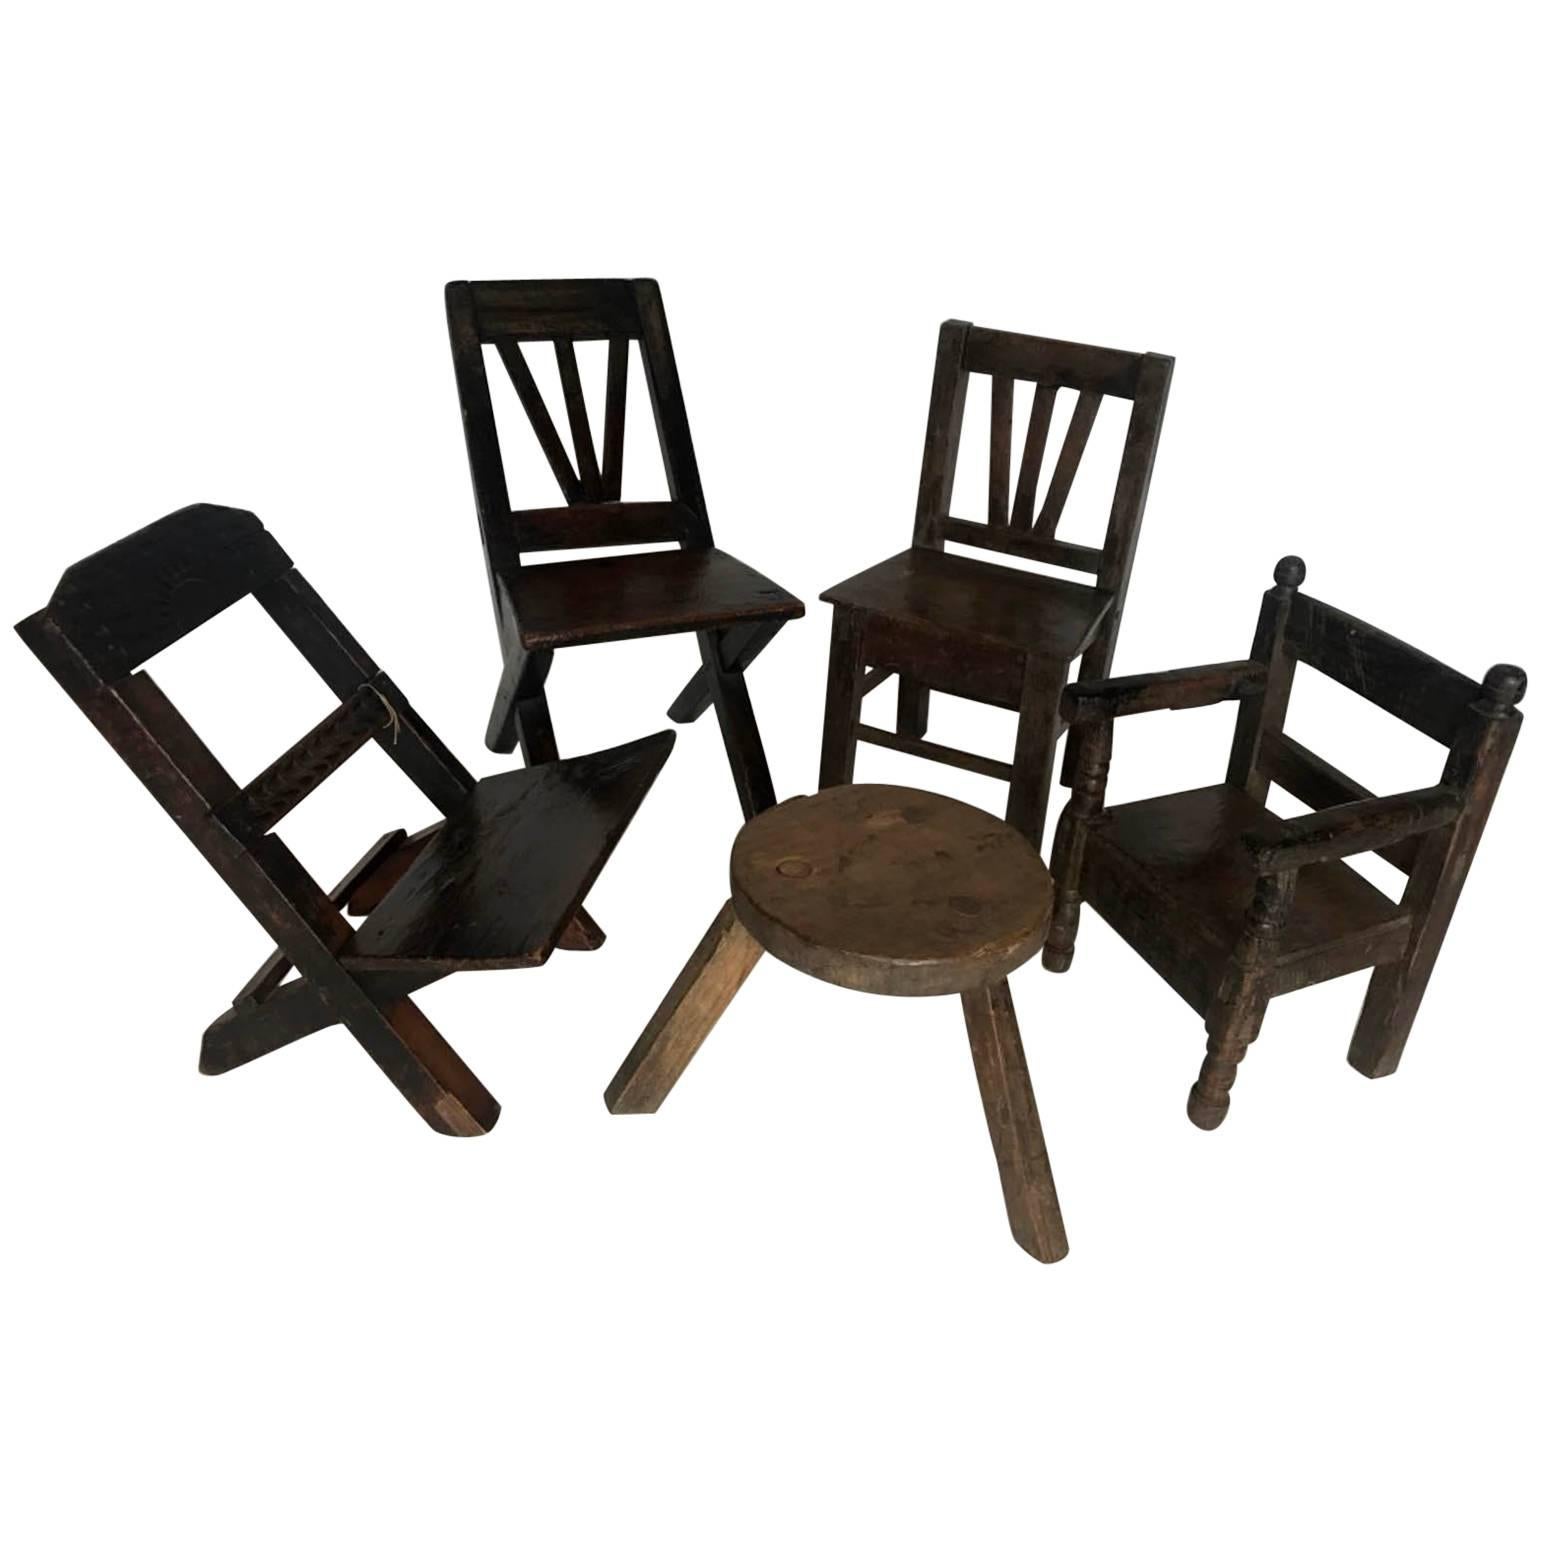 Collection of Vintage Kid''s Chairs and Stool